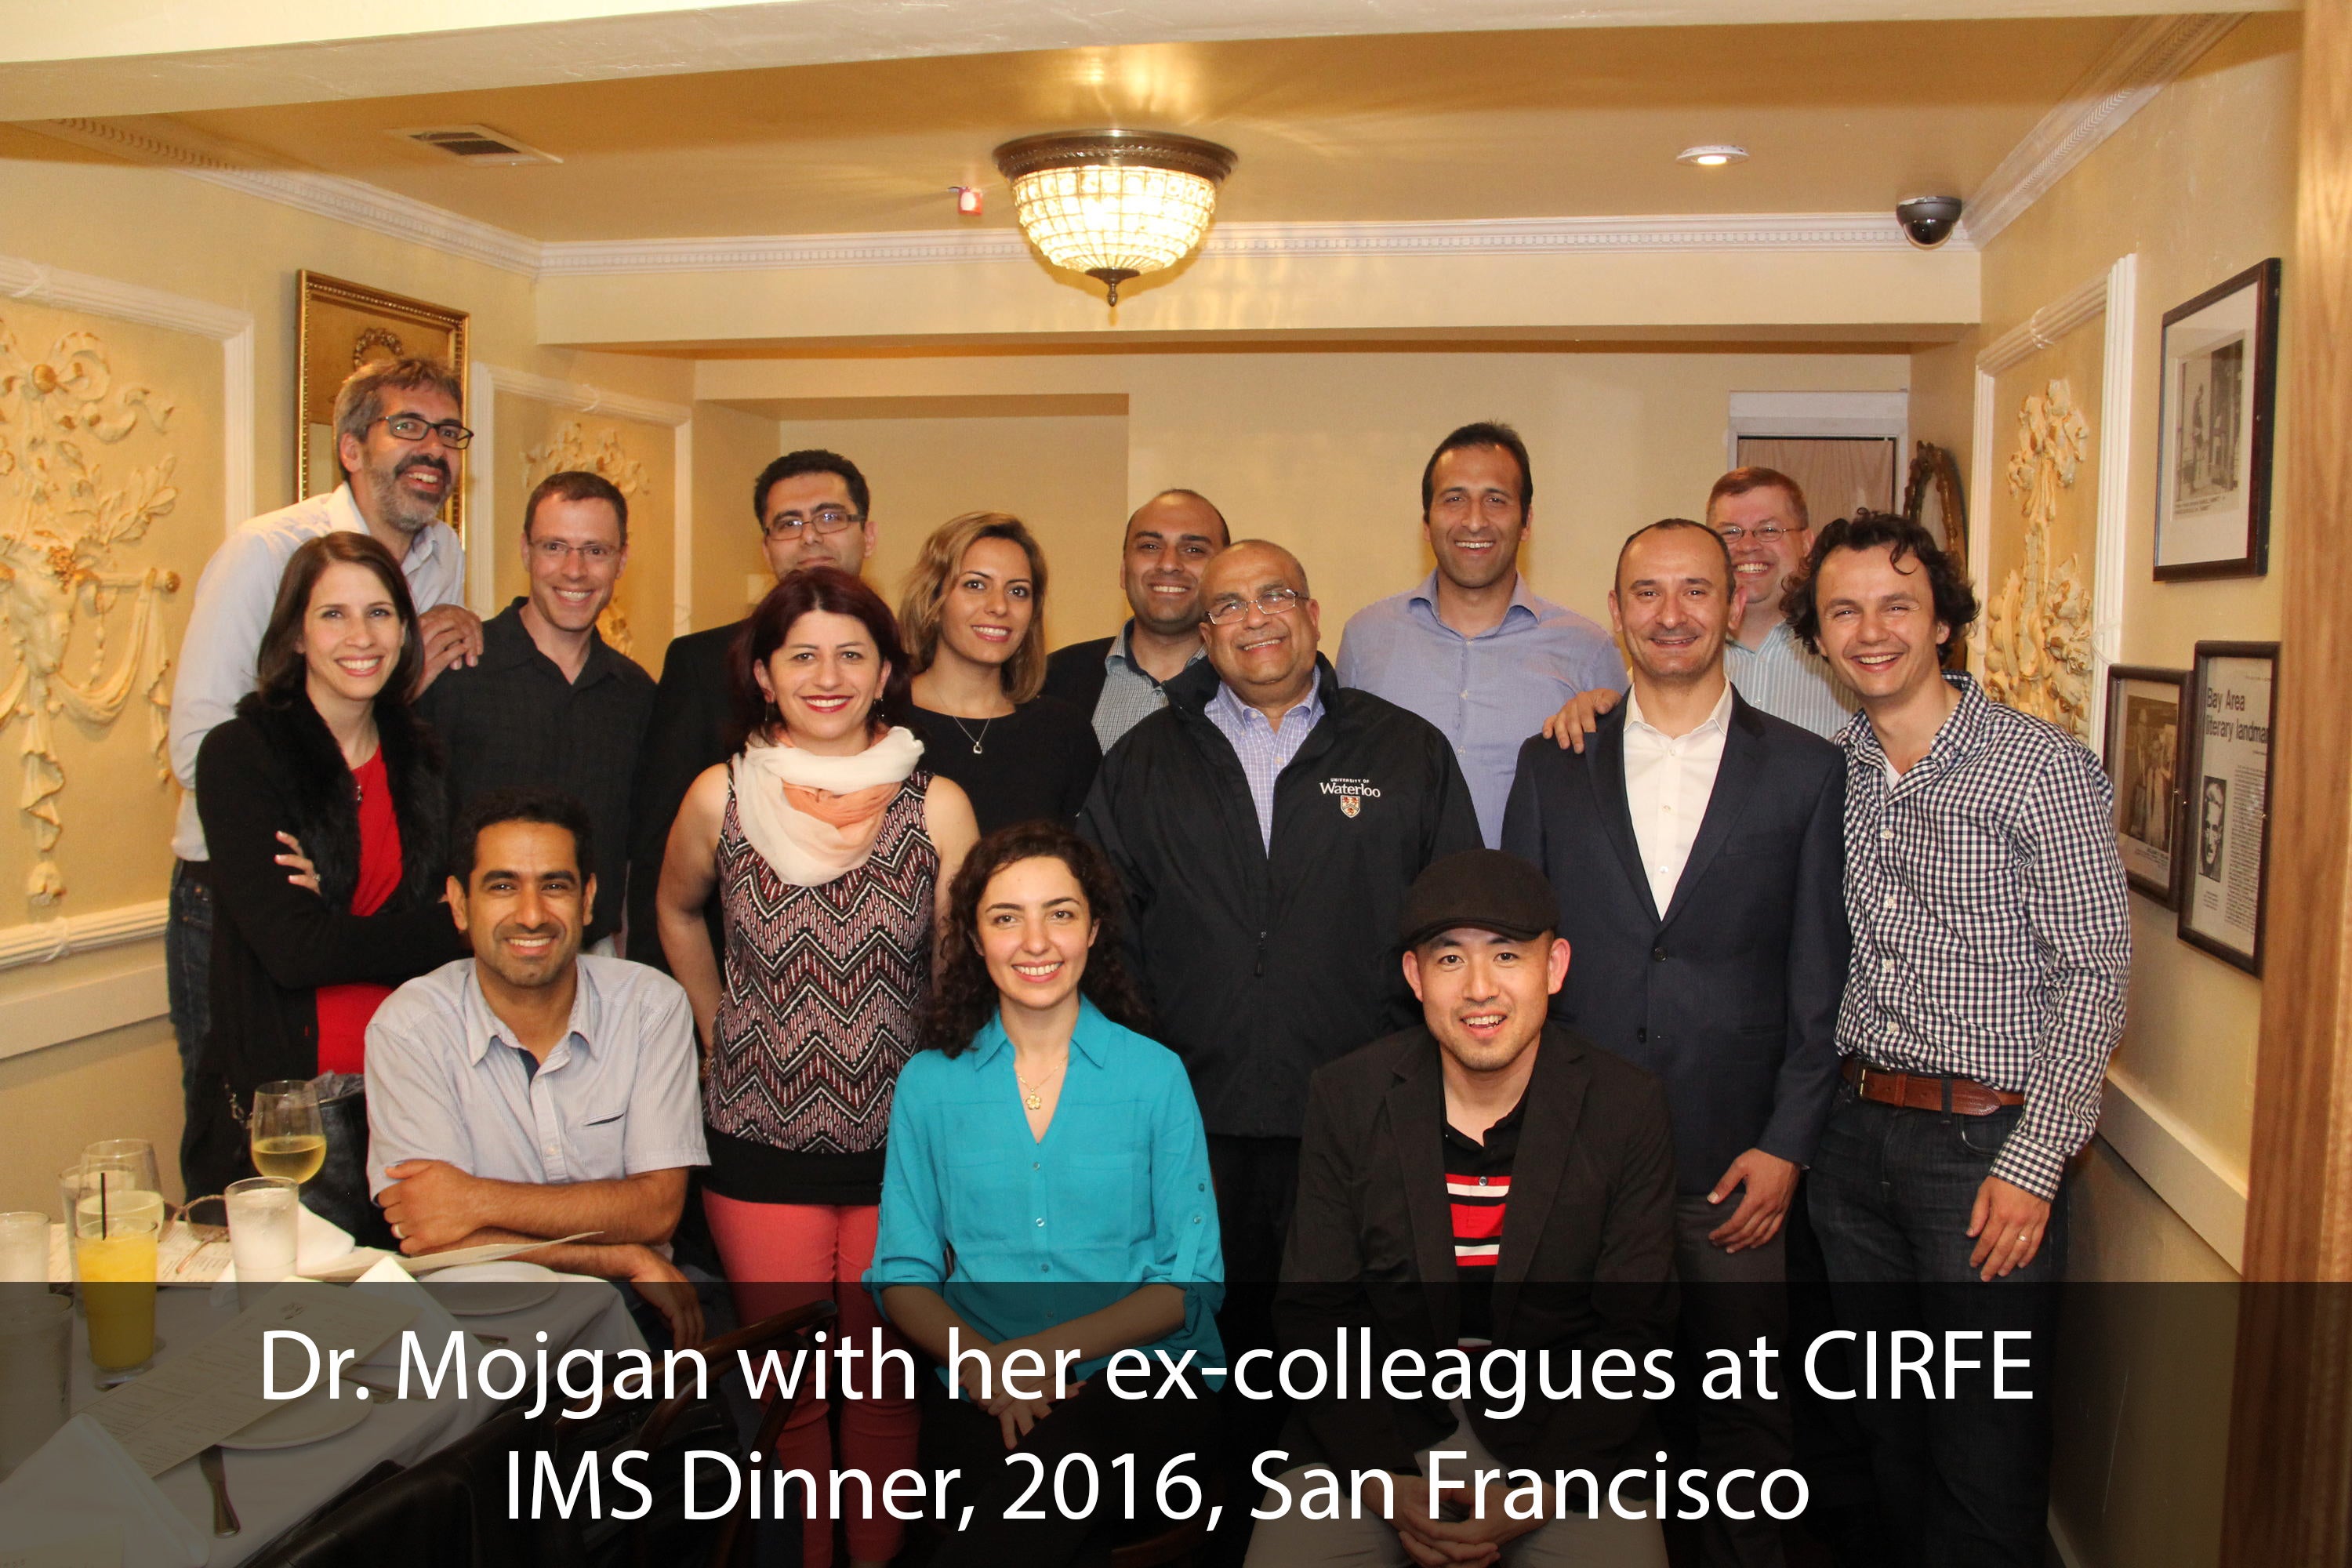 Dr. Mojgan with her ex-colleagues at CIRFE IMS Dinner, 2016, San Francisco